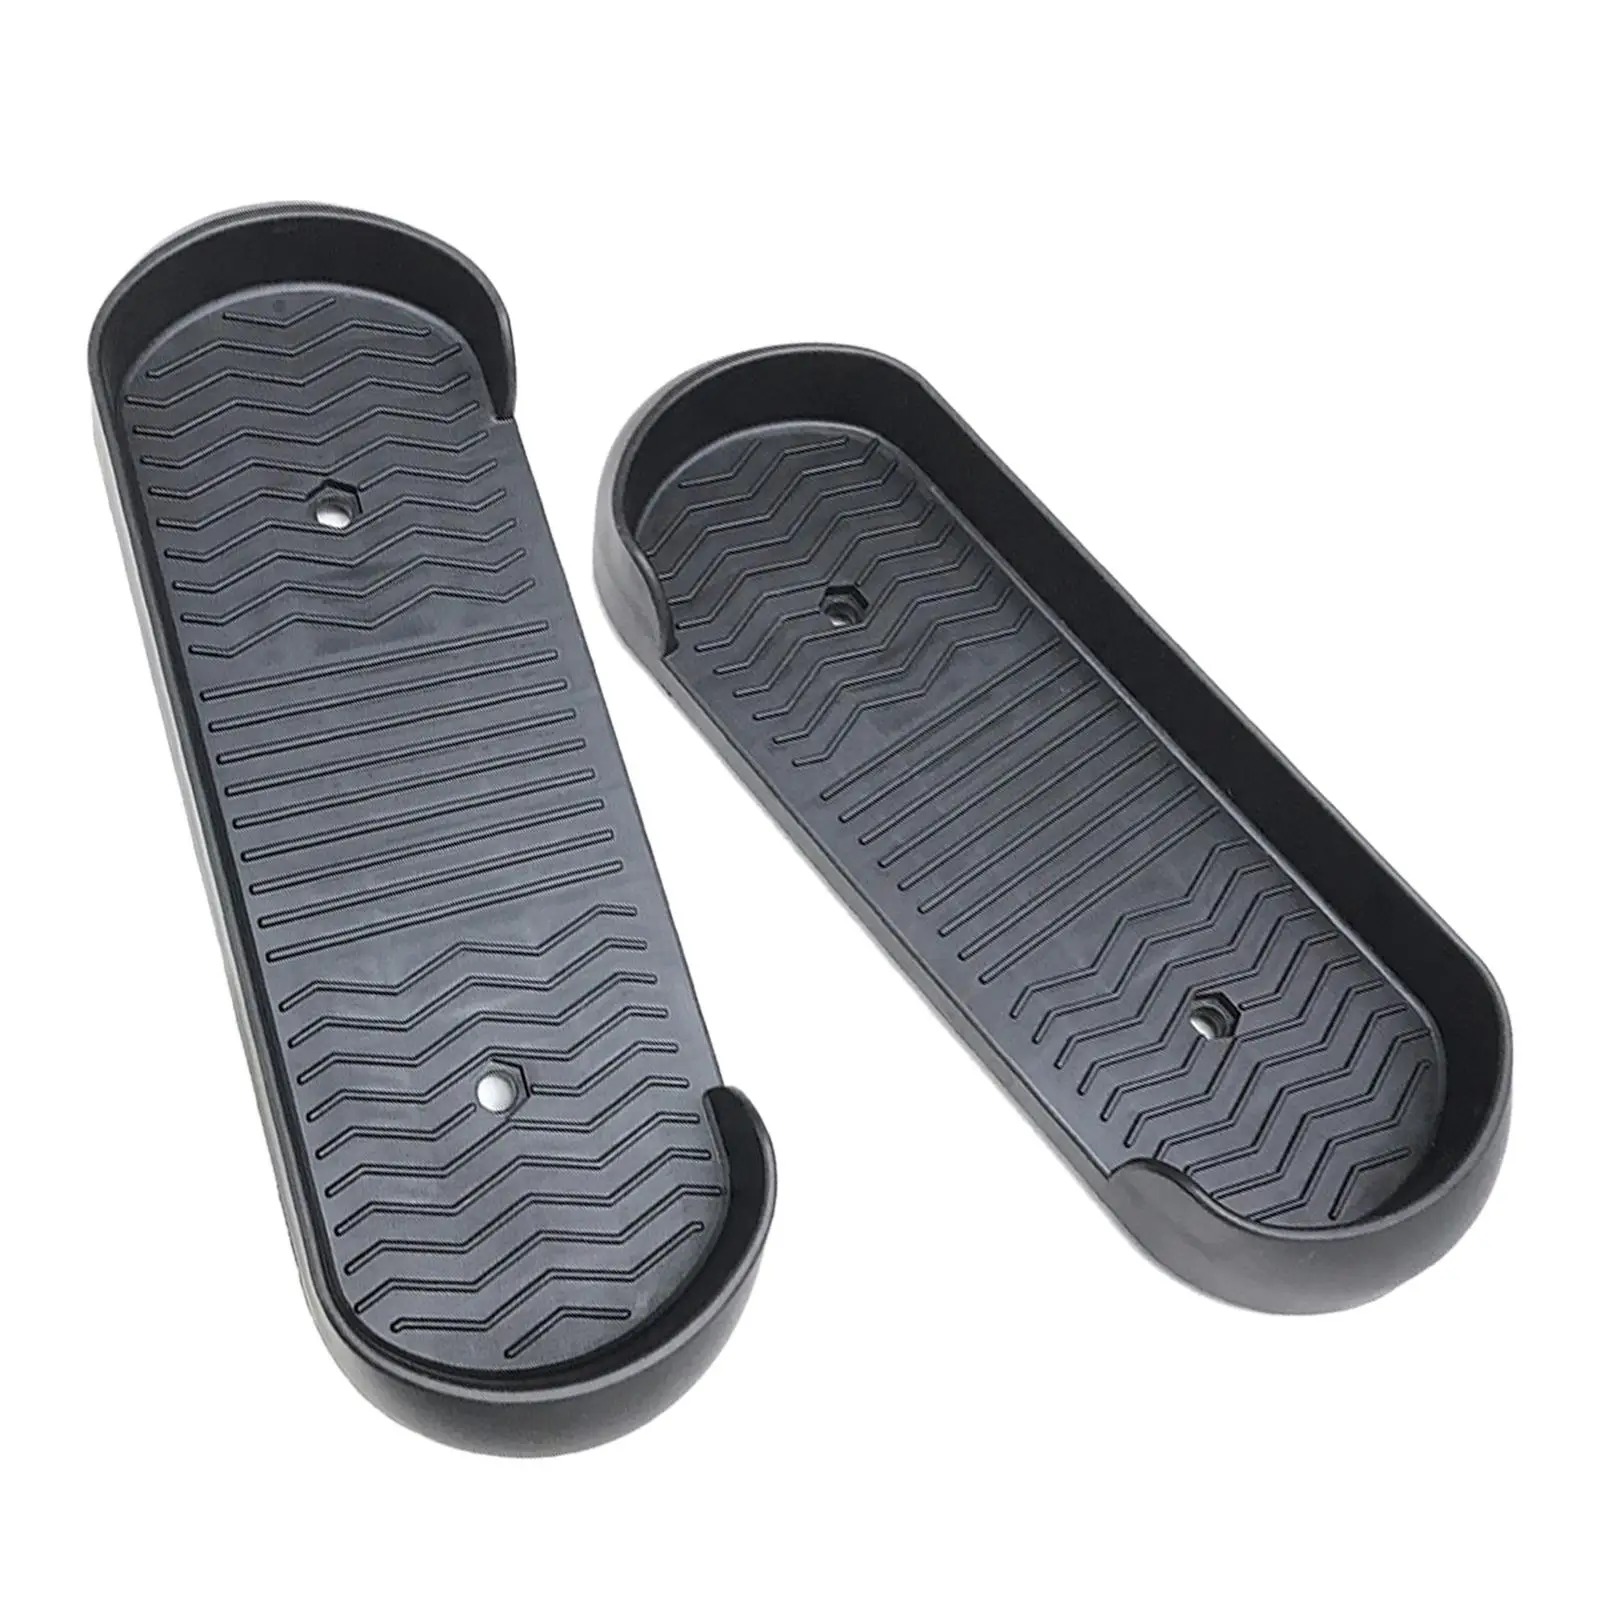 Elliptical Machine Foot Pedal Accessories Replace Elliptical Trainer Pedals for Sports Home Gym Use Exercise Body Building